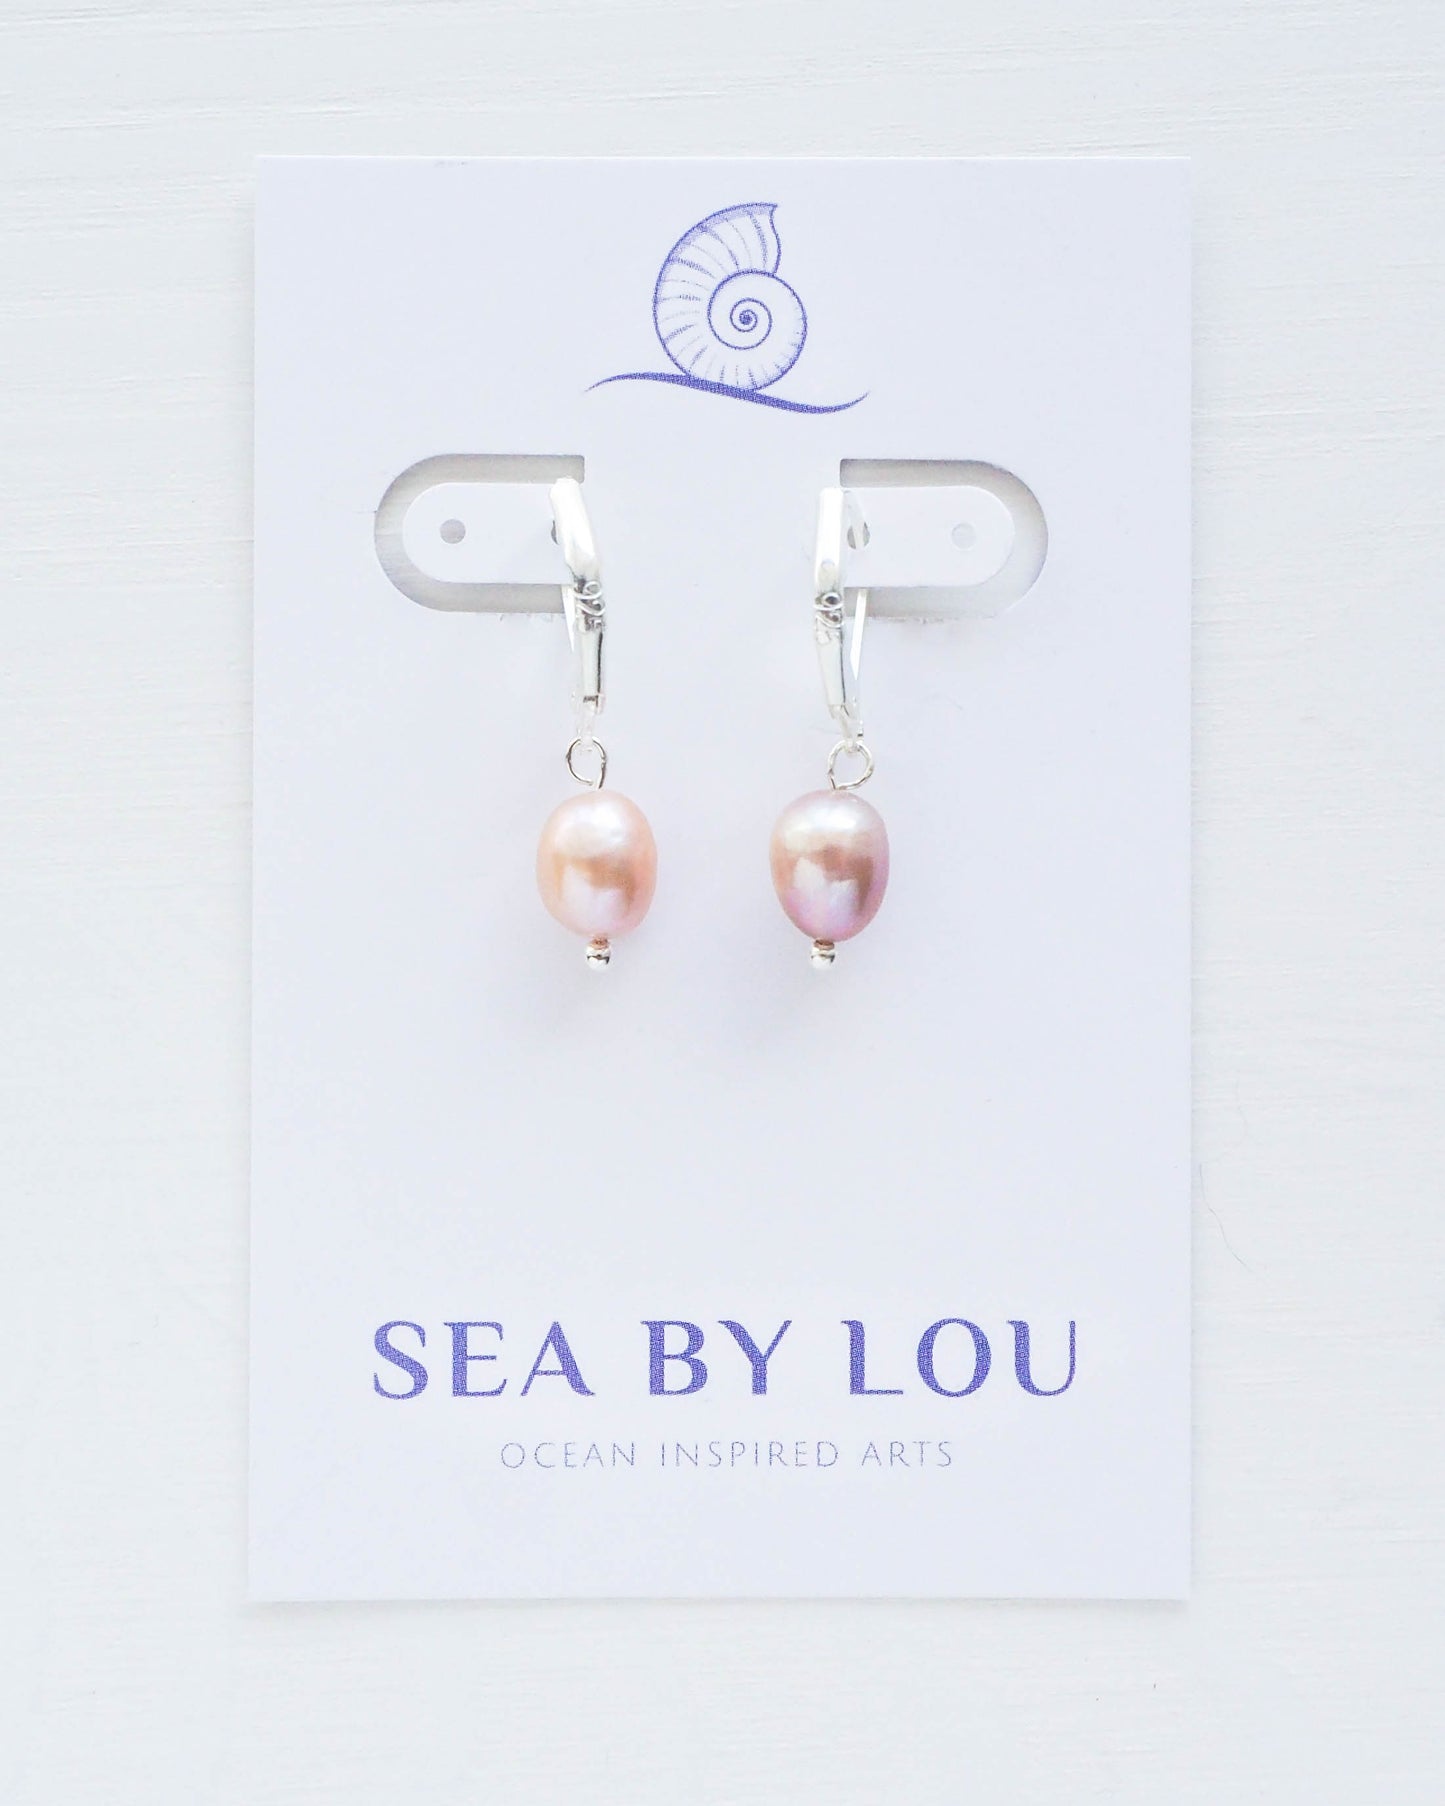 Stylish Beach Ensemble Featuring Rose Pink Freshwater Pearls Earrings: "Seaside Charm – Elevate Your Look with Seachic Earrings and Beach Chic Fashion